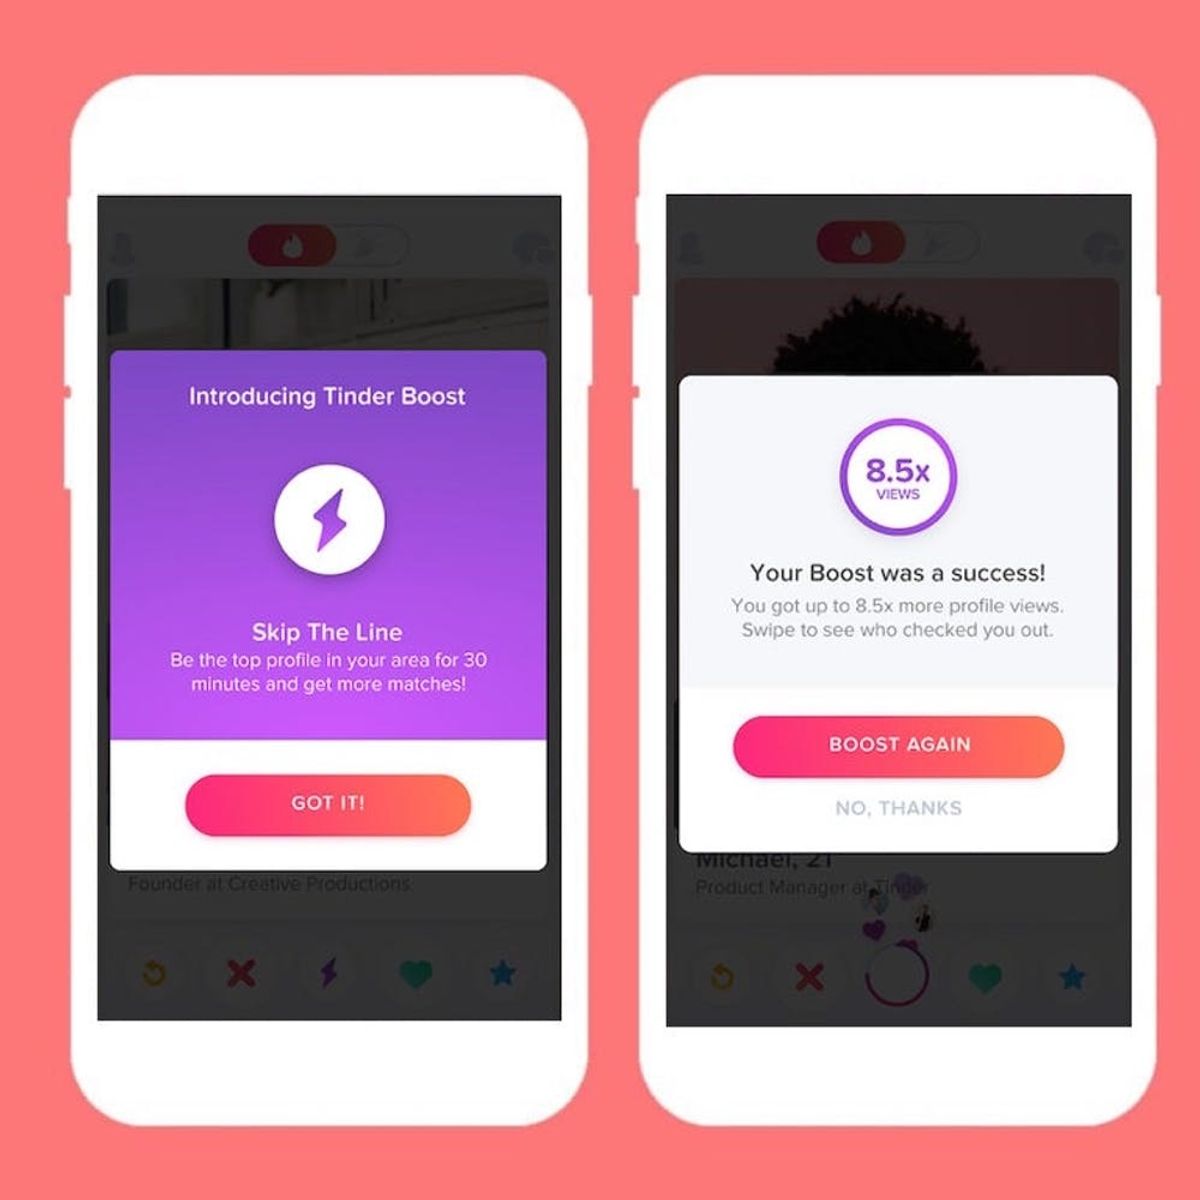 Here’s Tinder’s Plan to Get You More Matches